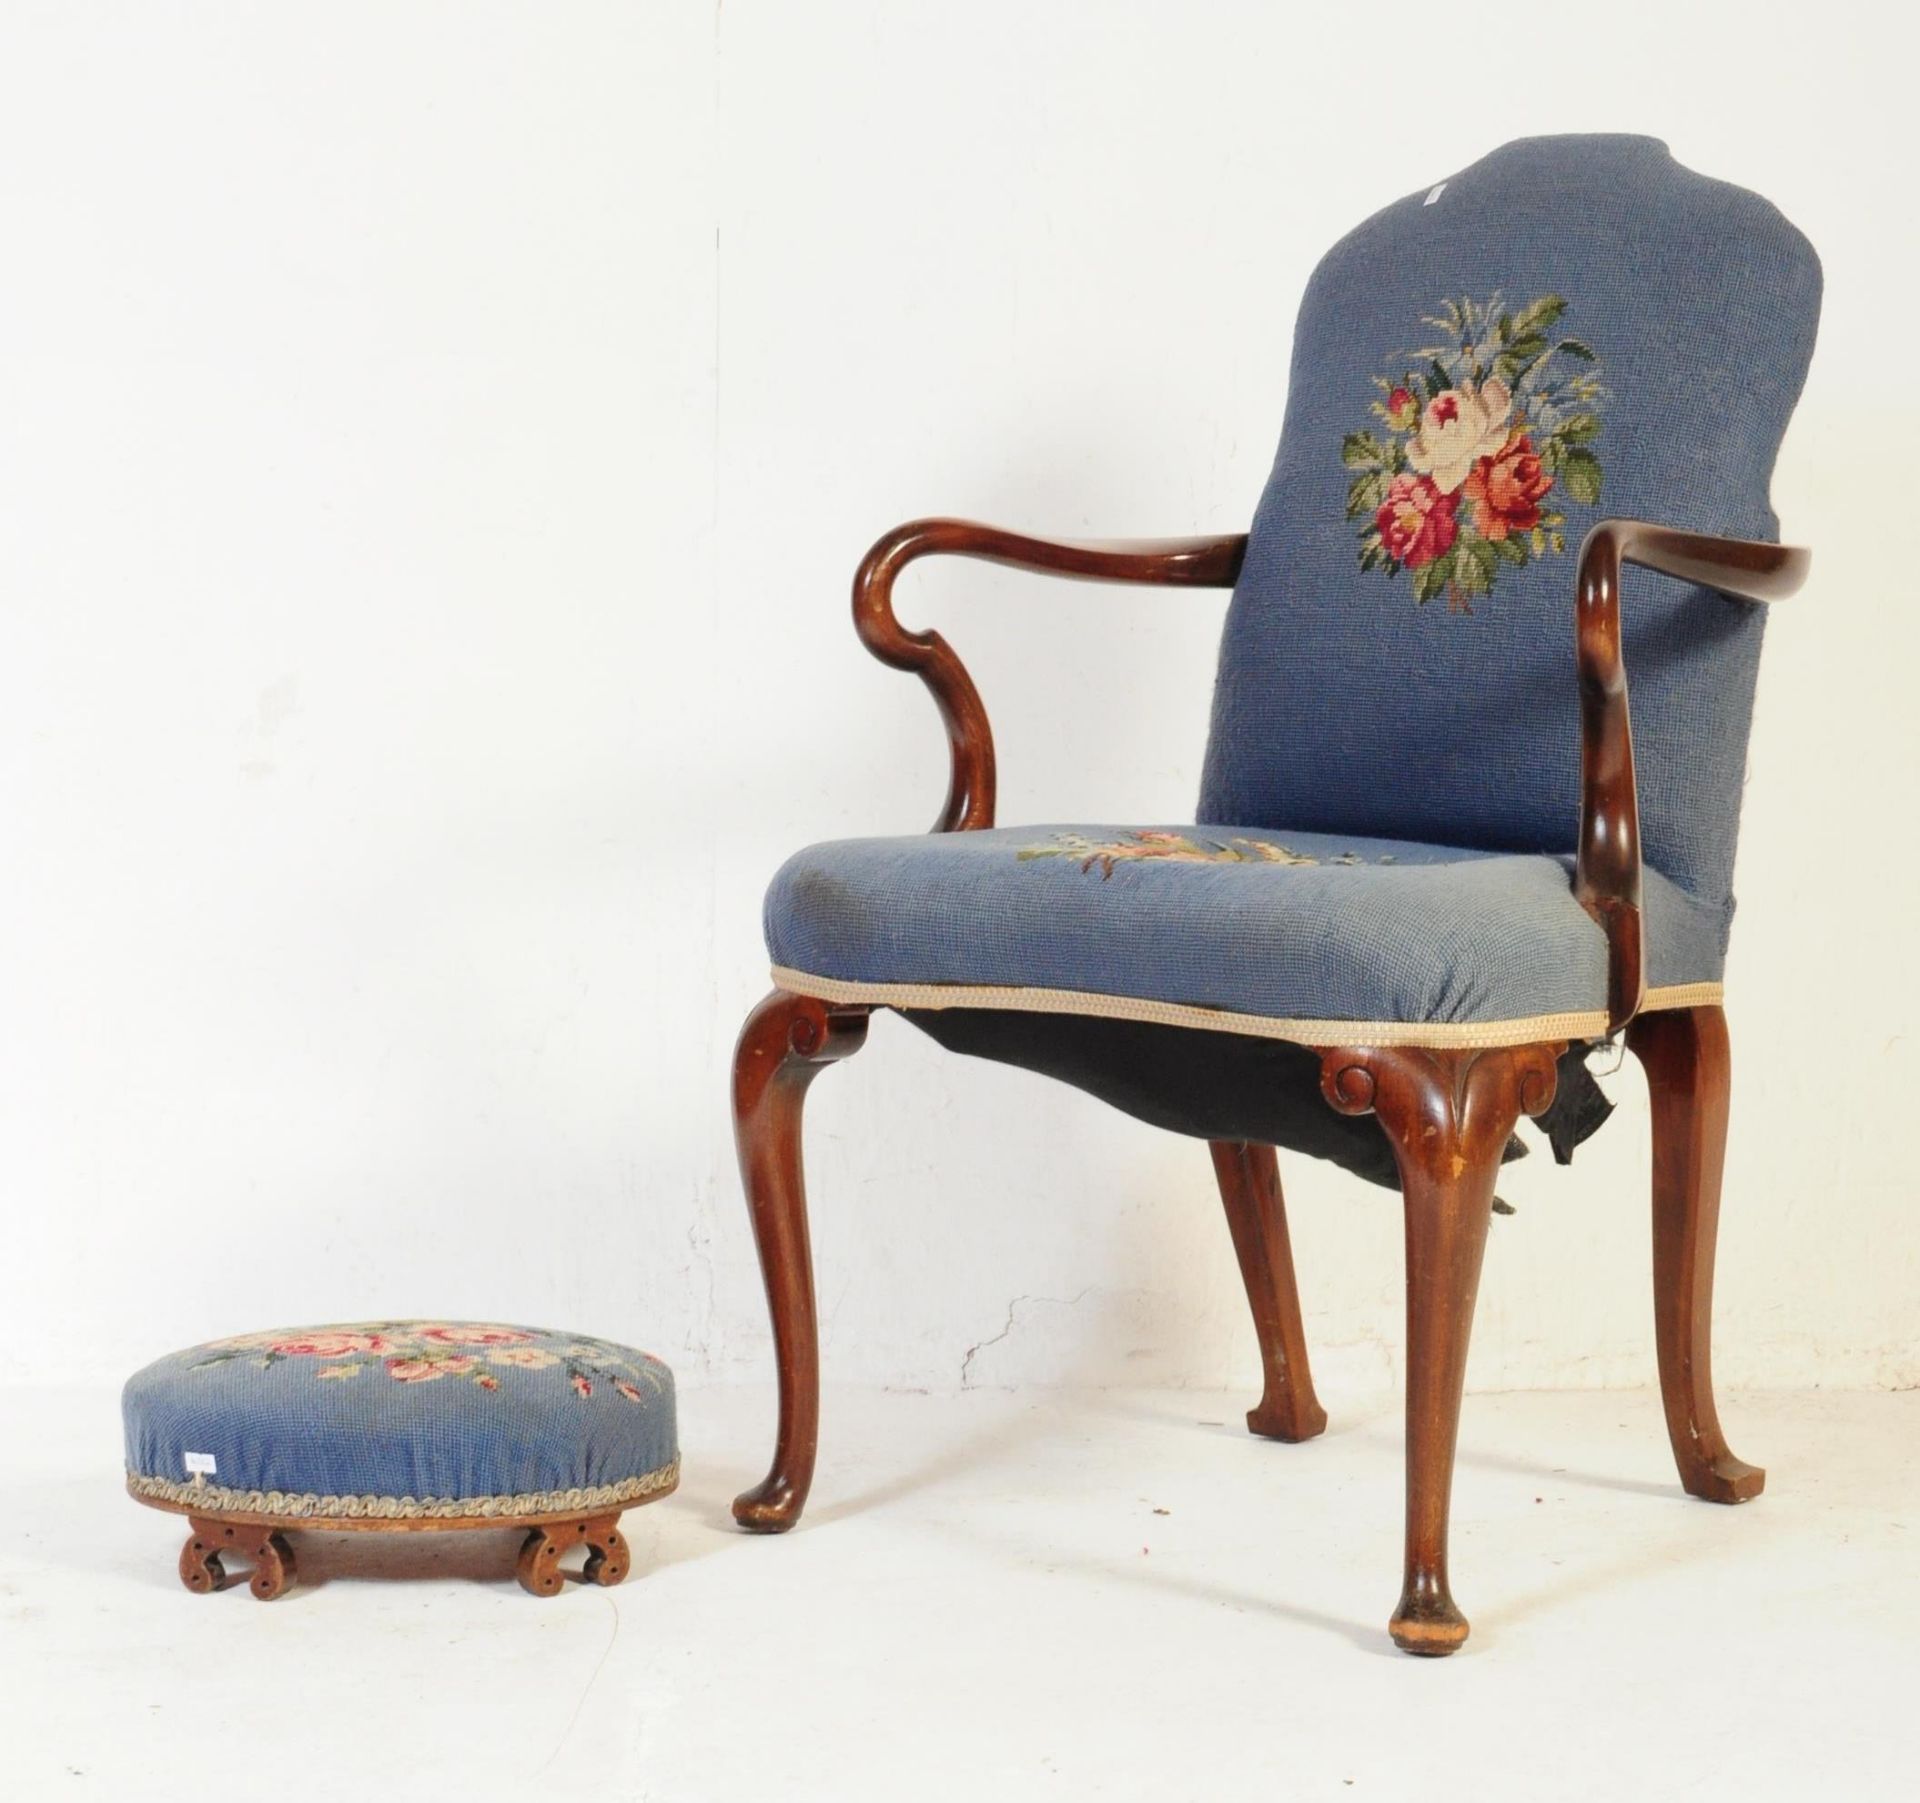 EARLY 20TH CENTURY MAHOGANY LOUNGE ARM CHAIR WITH STOOL